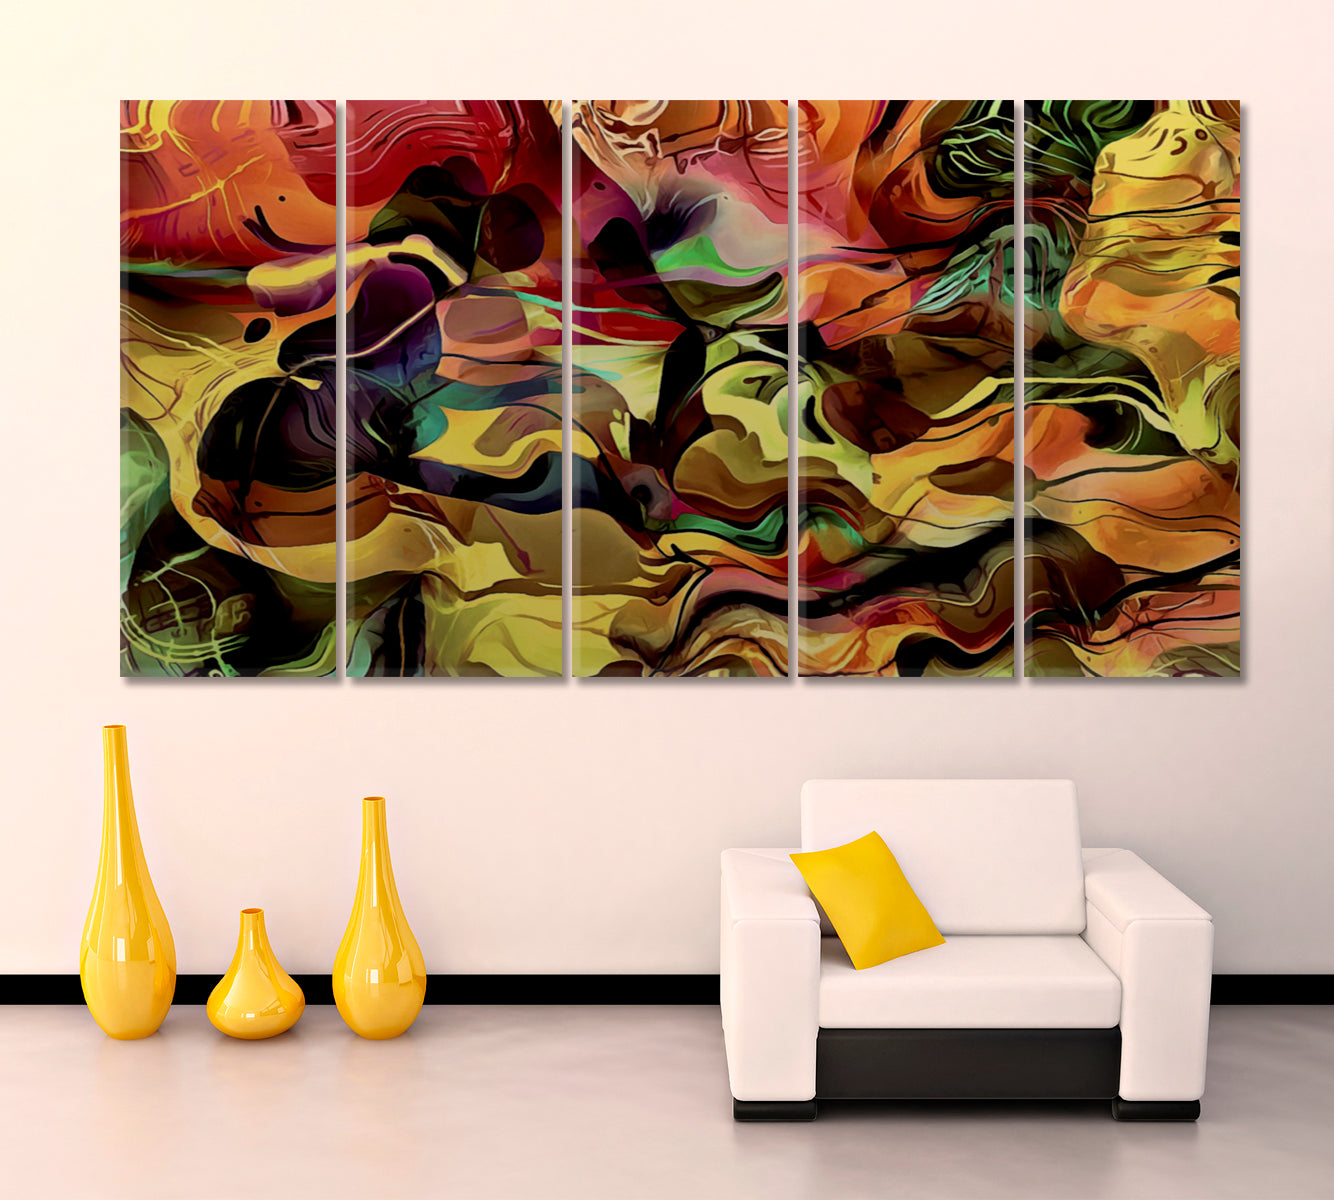 Abstract Colorful Wavy Spirals Contemporary Art Artesty 5 panels 36" x 24" 